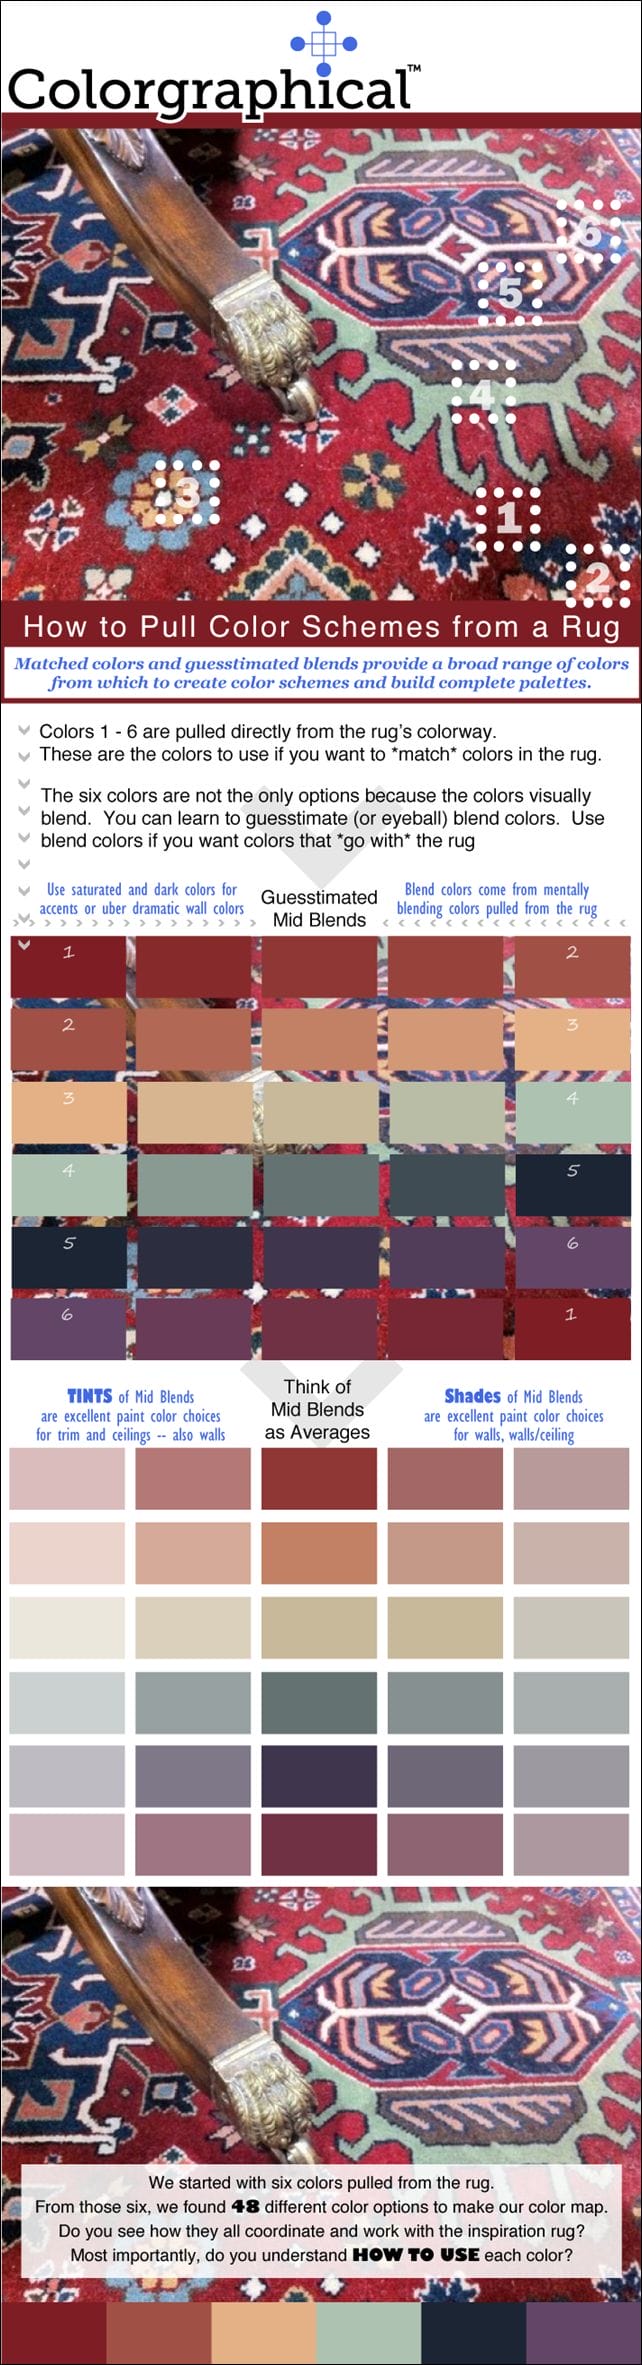 how-to-pull-colors-from-a-rug